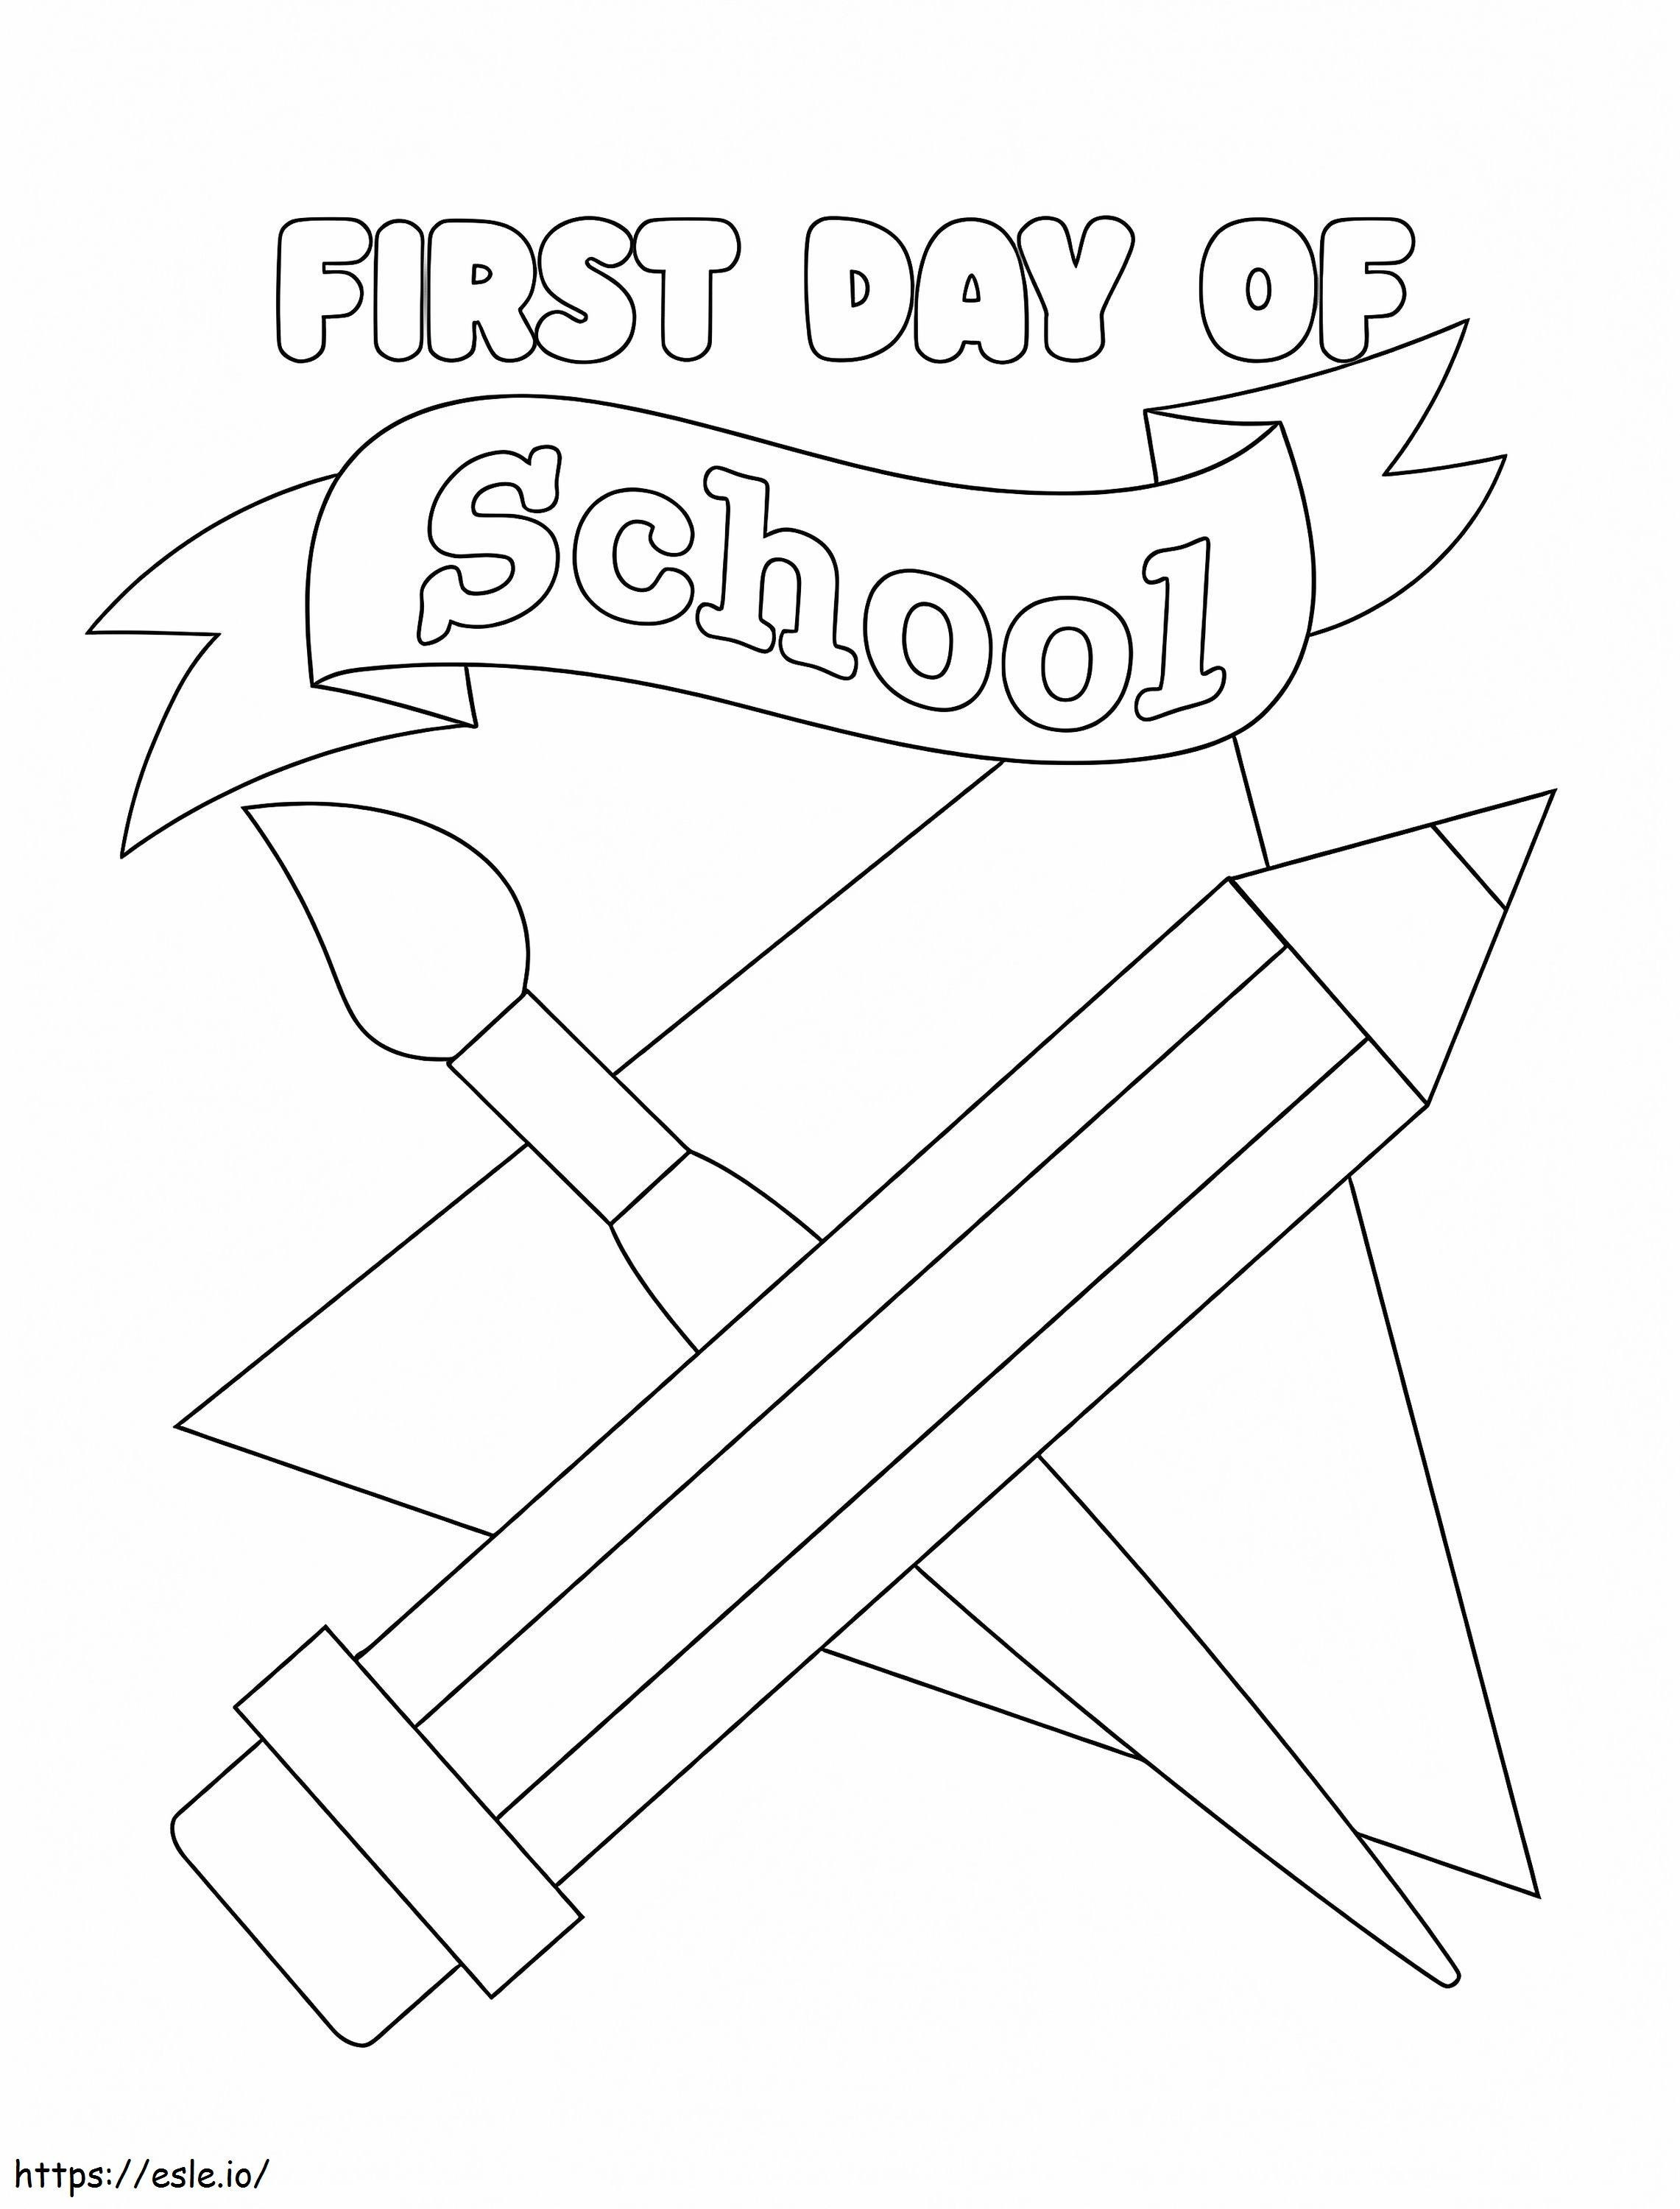 First Day Of School Printable coloring page